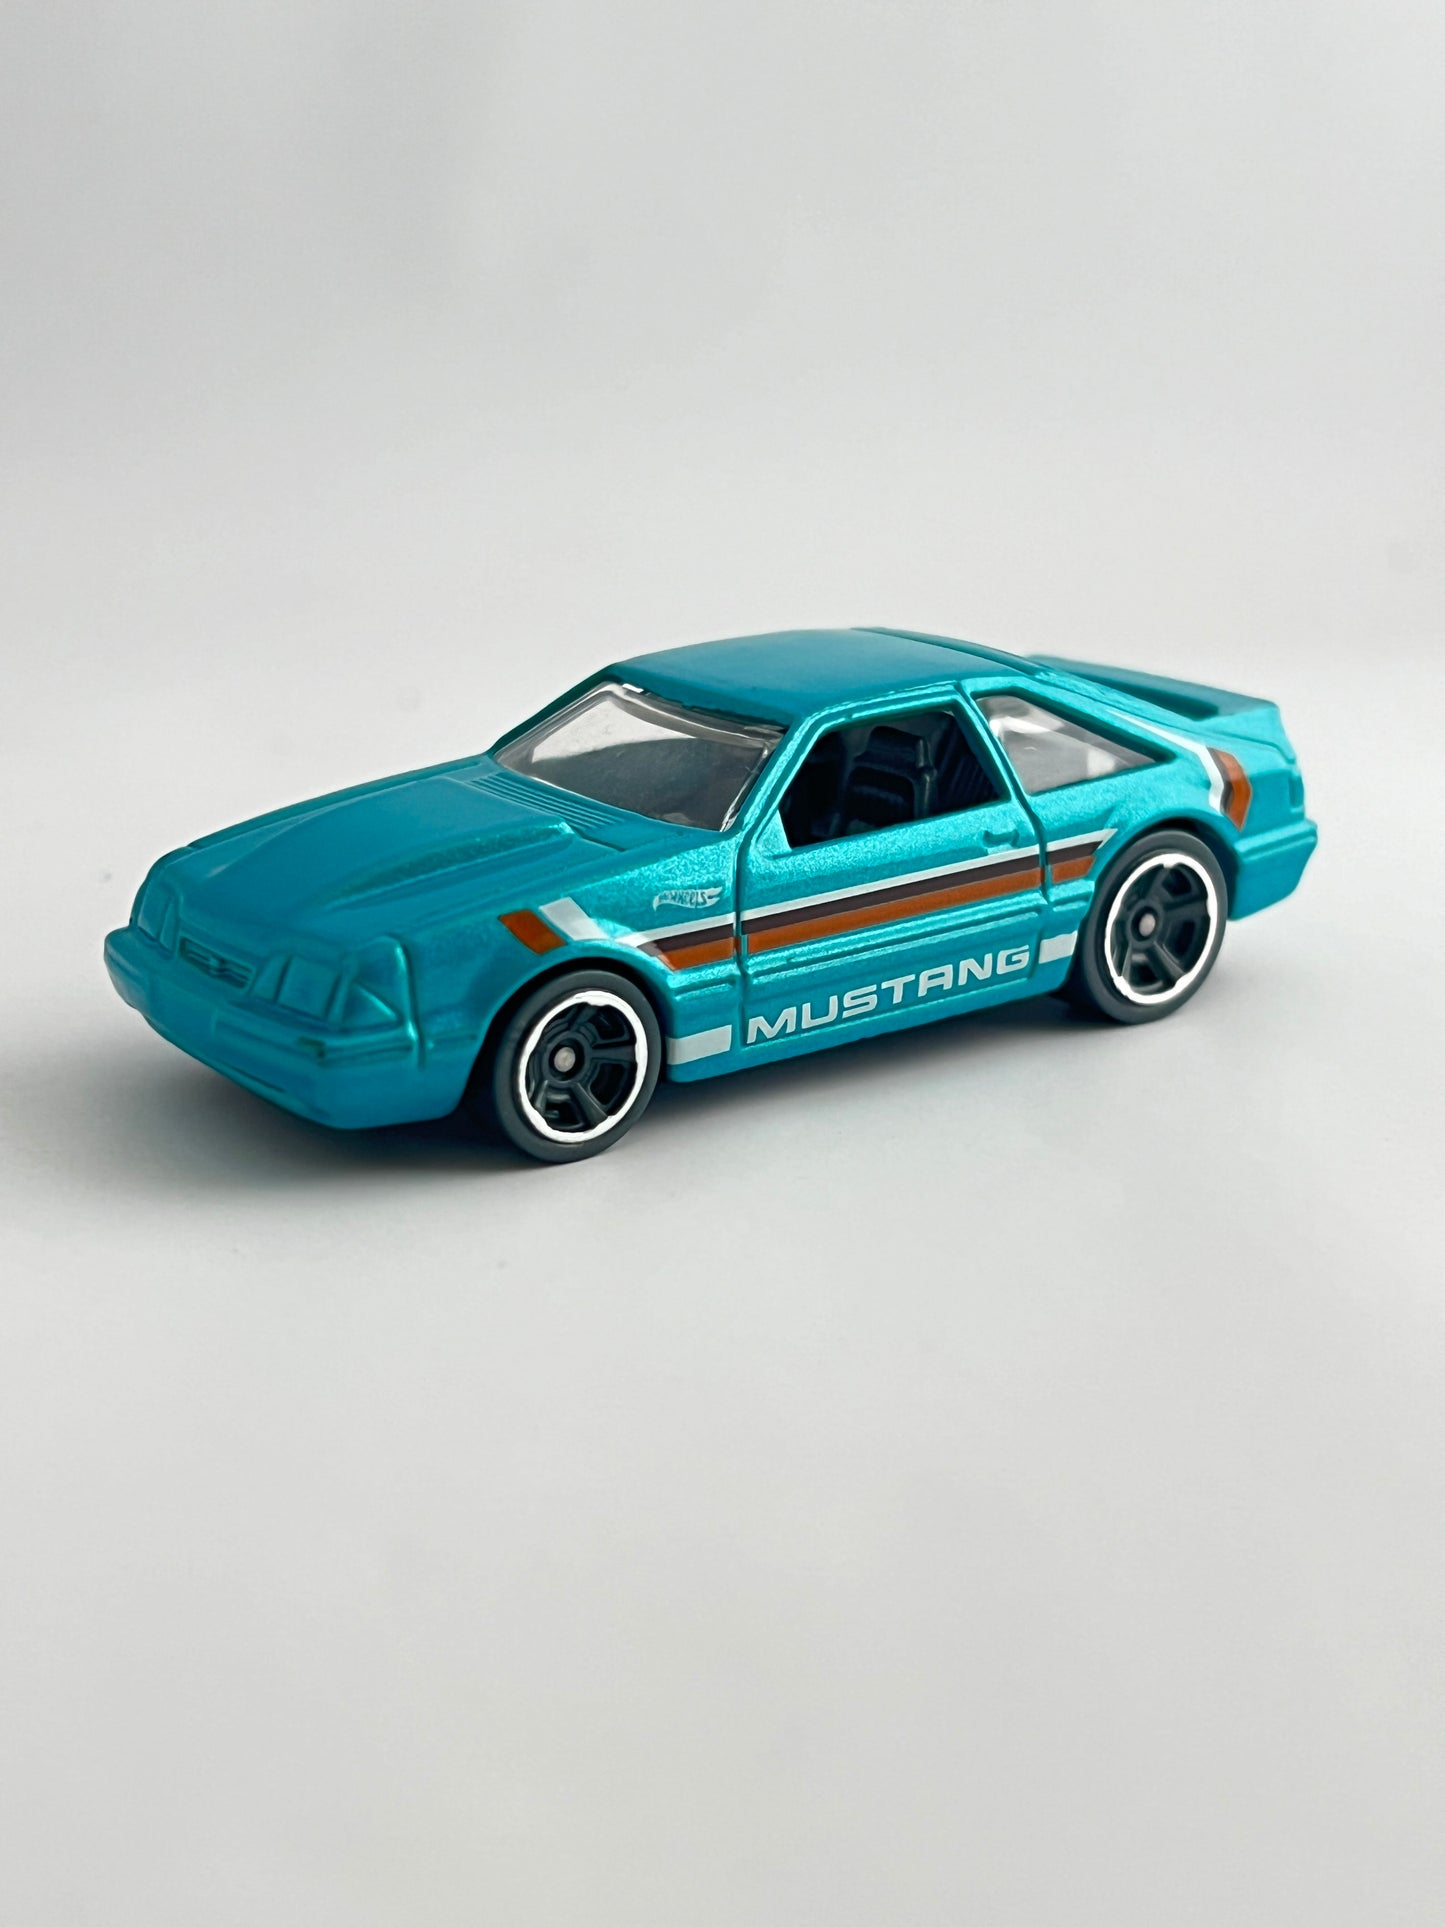 92 FORD MUSTANG- UNCARDED - MINT CONDITION